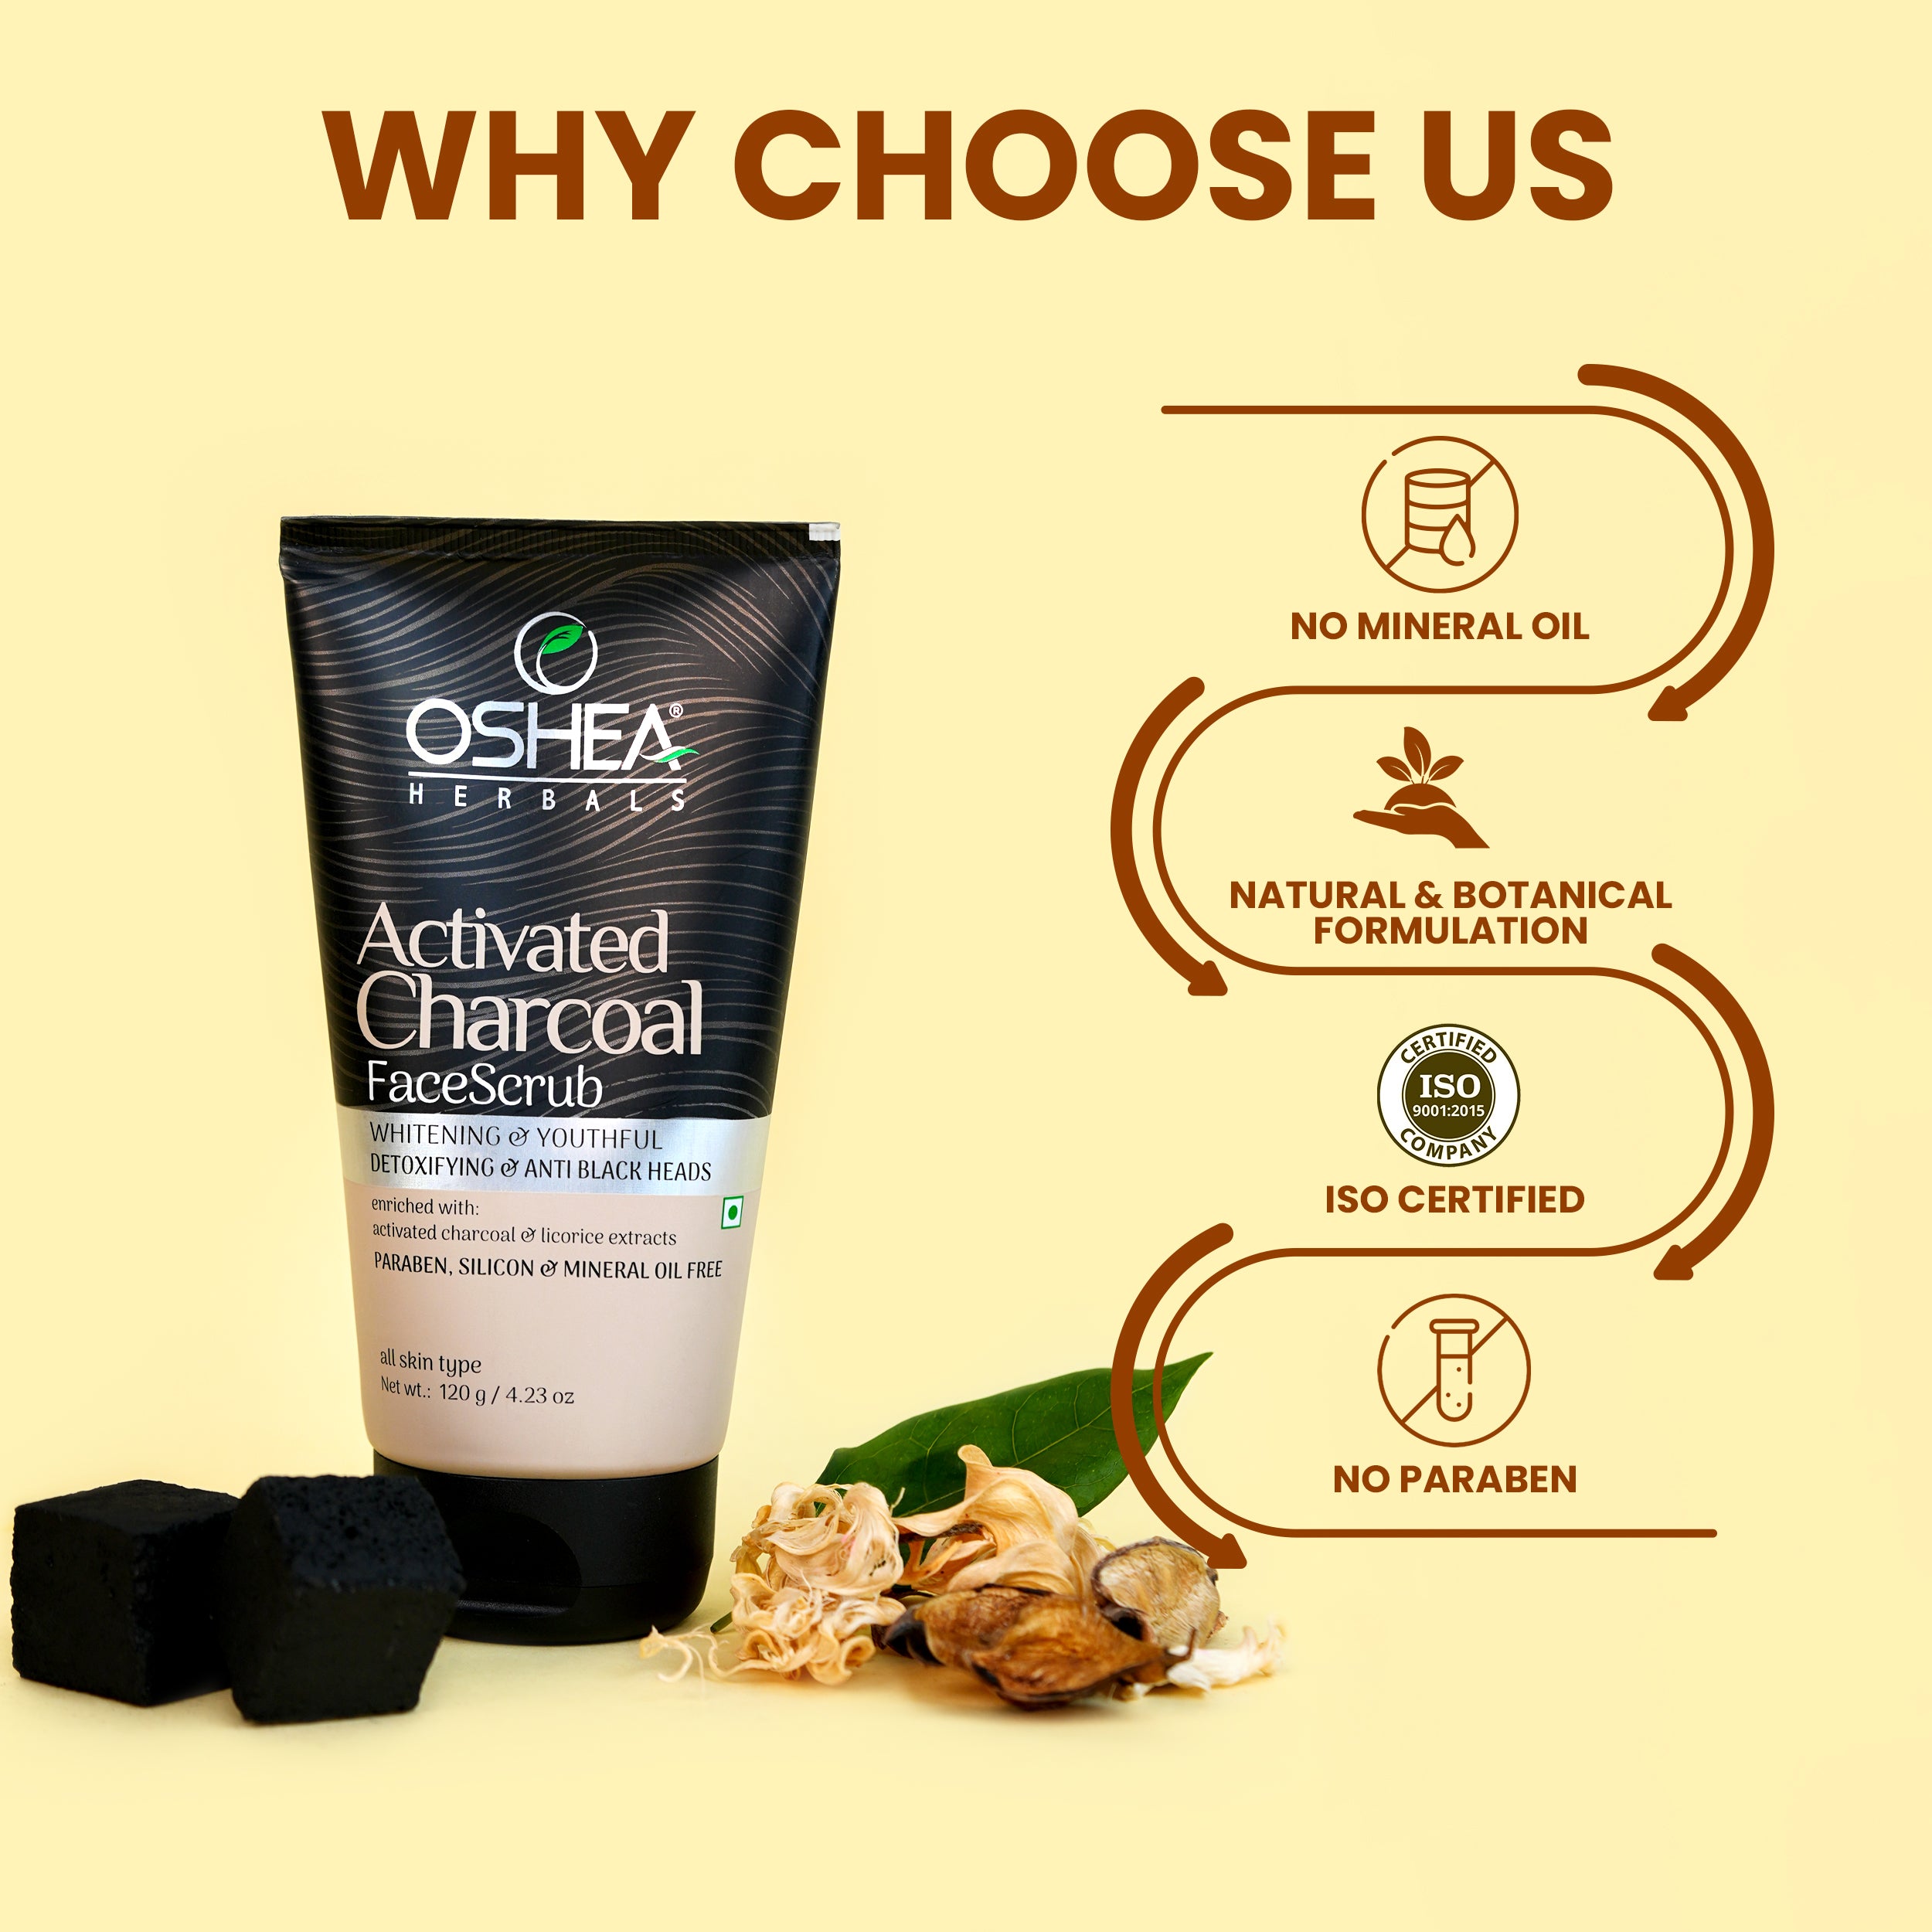 Why choose us Activated Charcoal Face Scrub Oshea Herbals